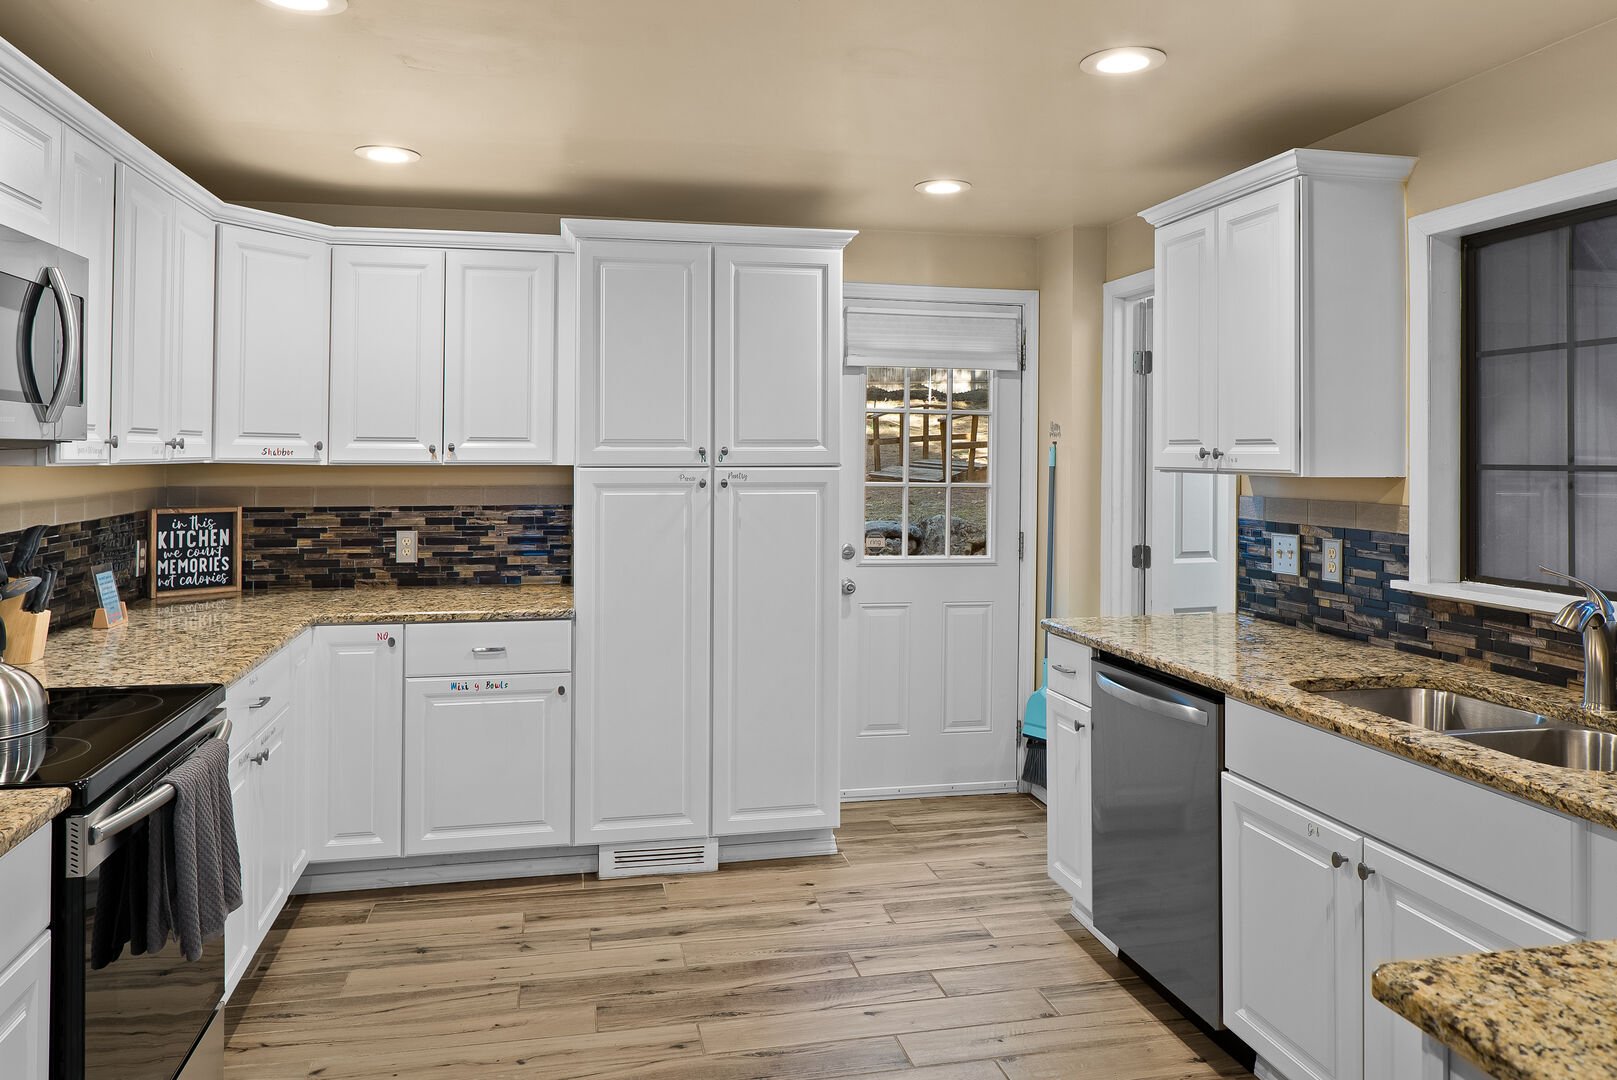 Spacious kitchen has all of the necessities to cook. Door leads to backyard.